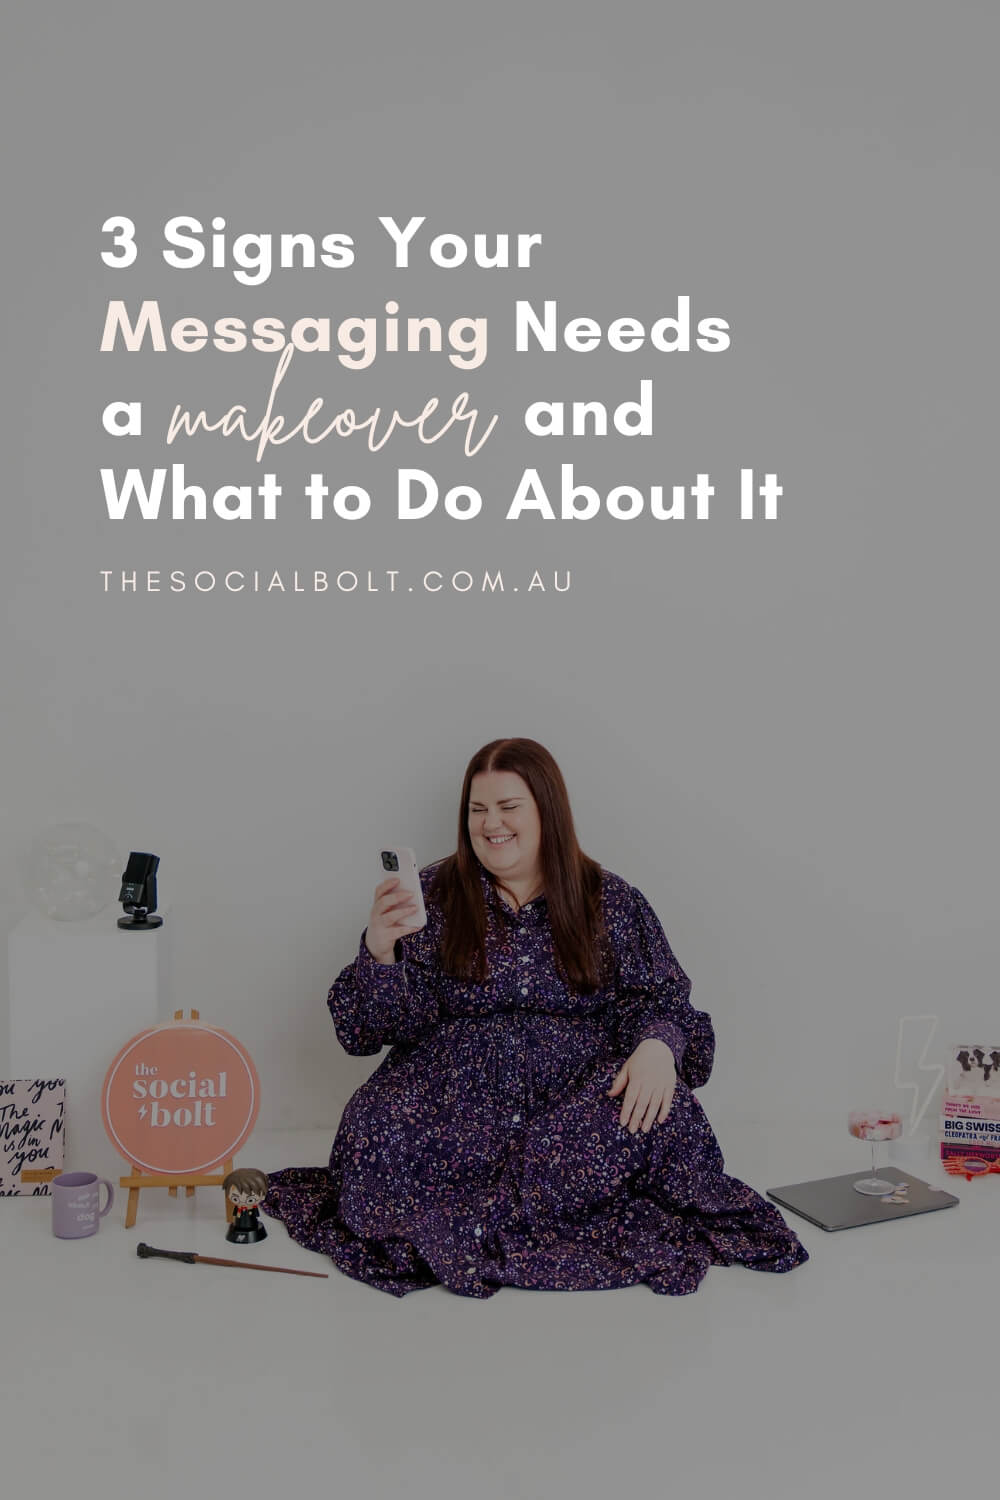 3 Signs Your Messaging Needs a Makeover, and What to Do About It